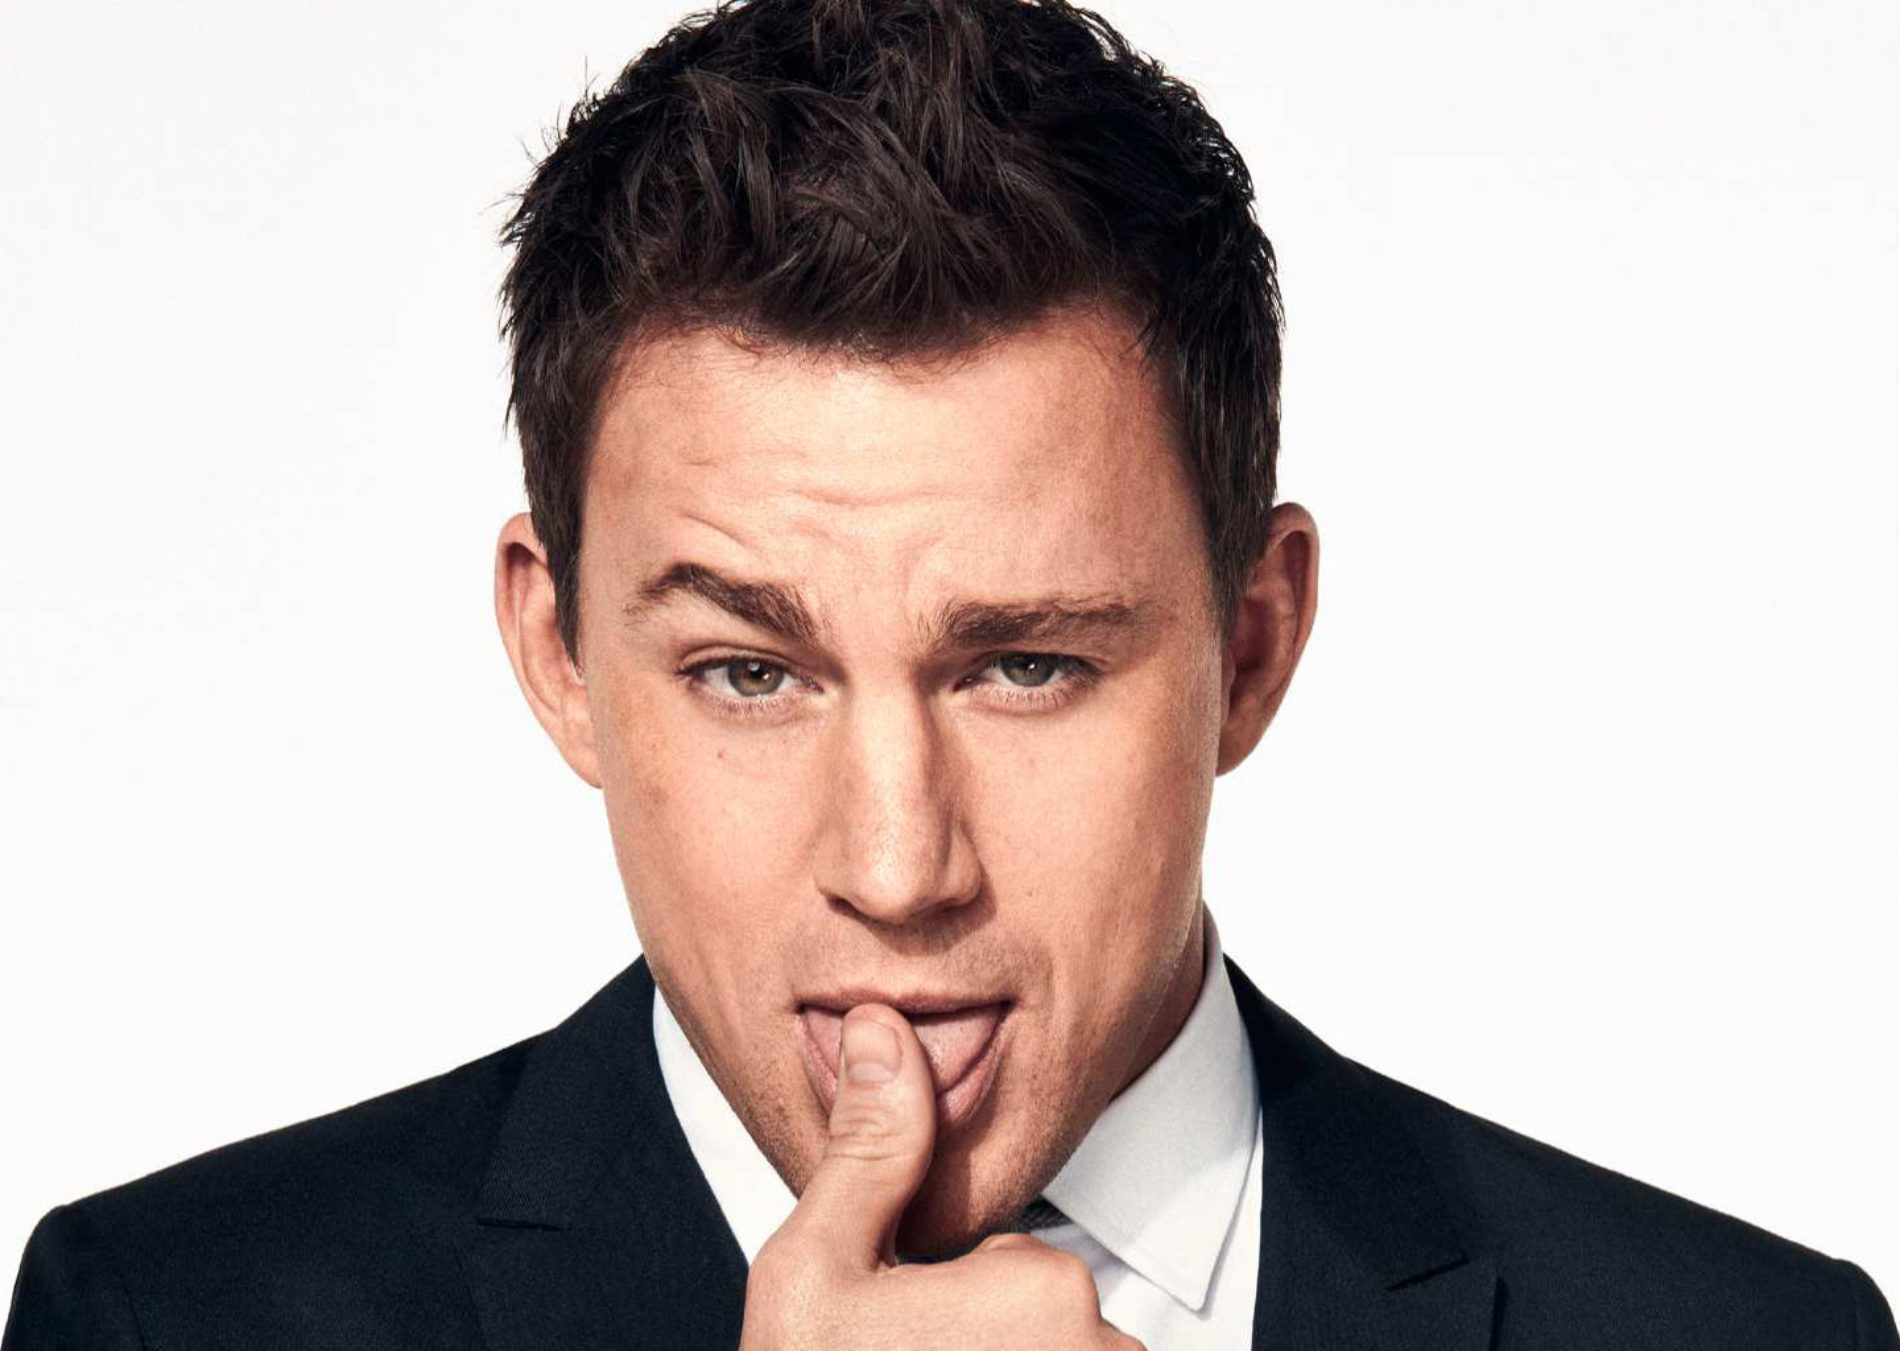 10 tweets that made women fall in love with Channing Tatum